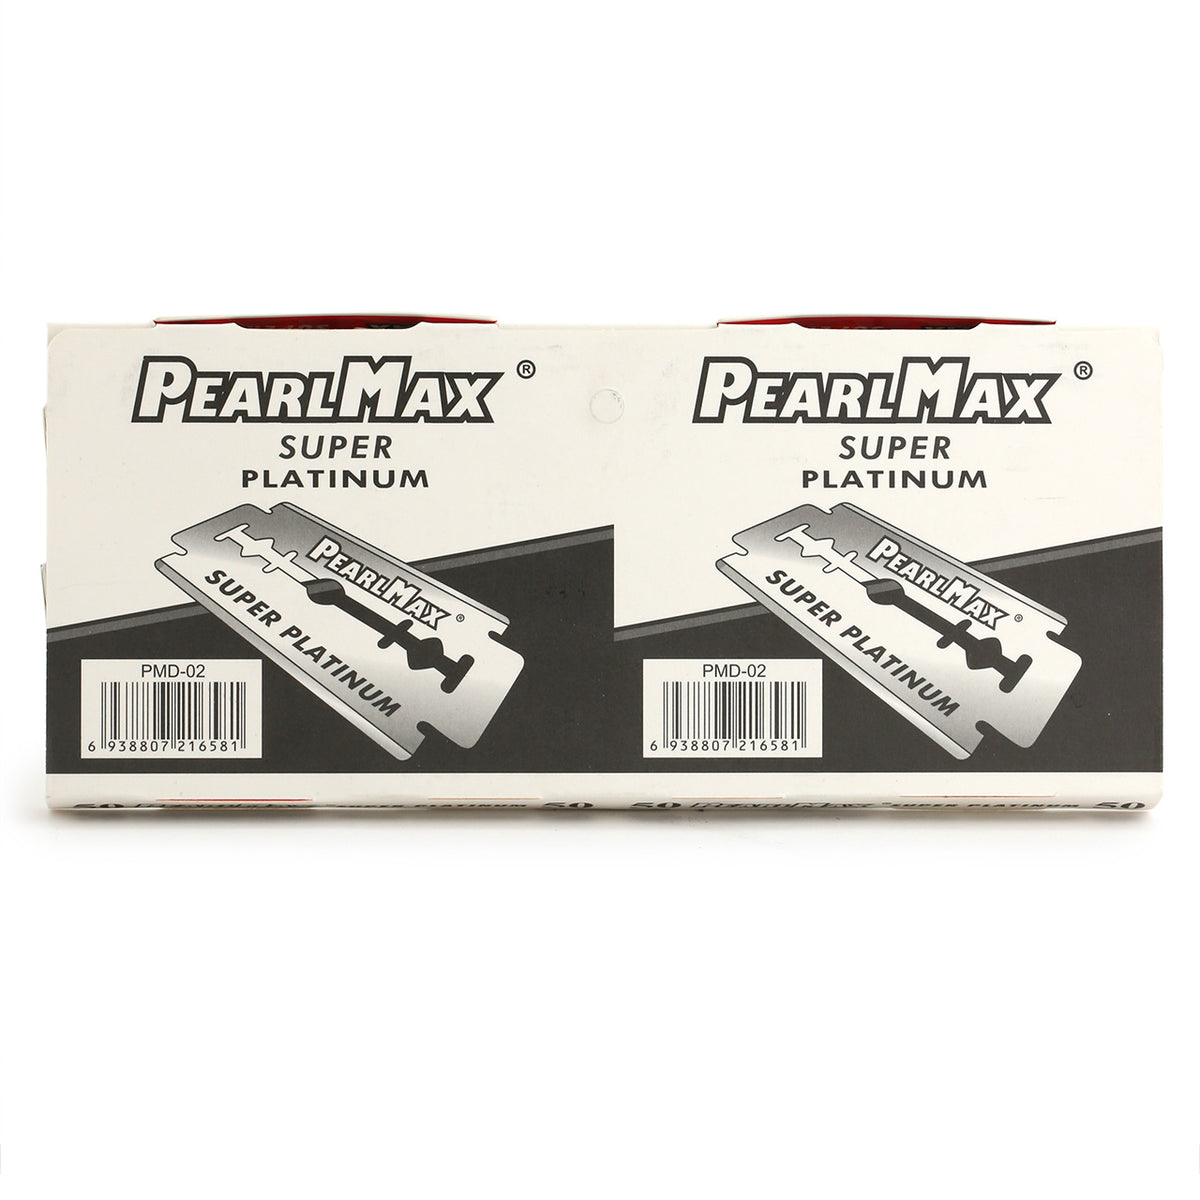 PearlMax pack of 100 blades closed